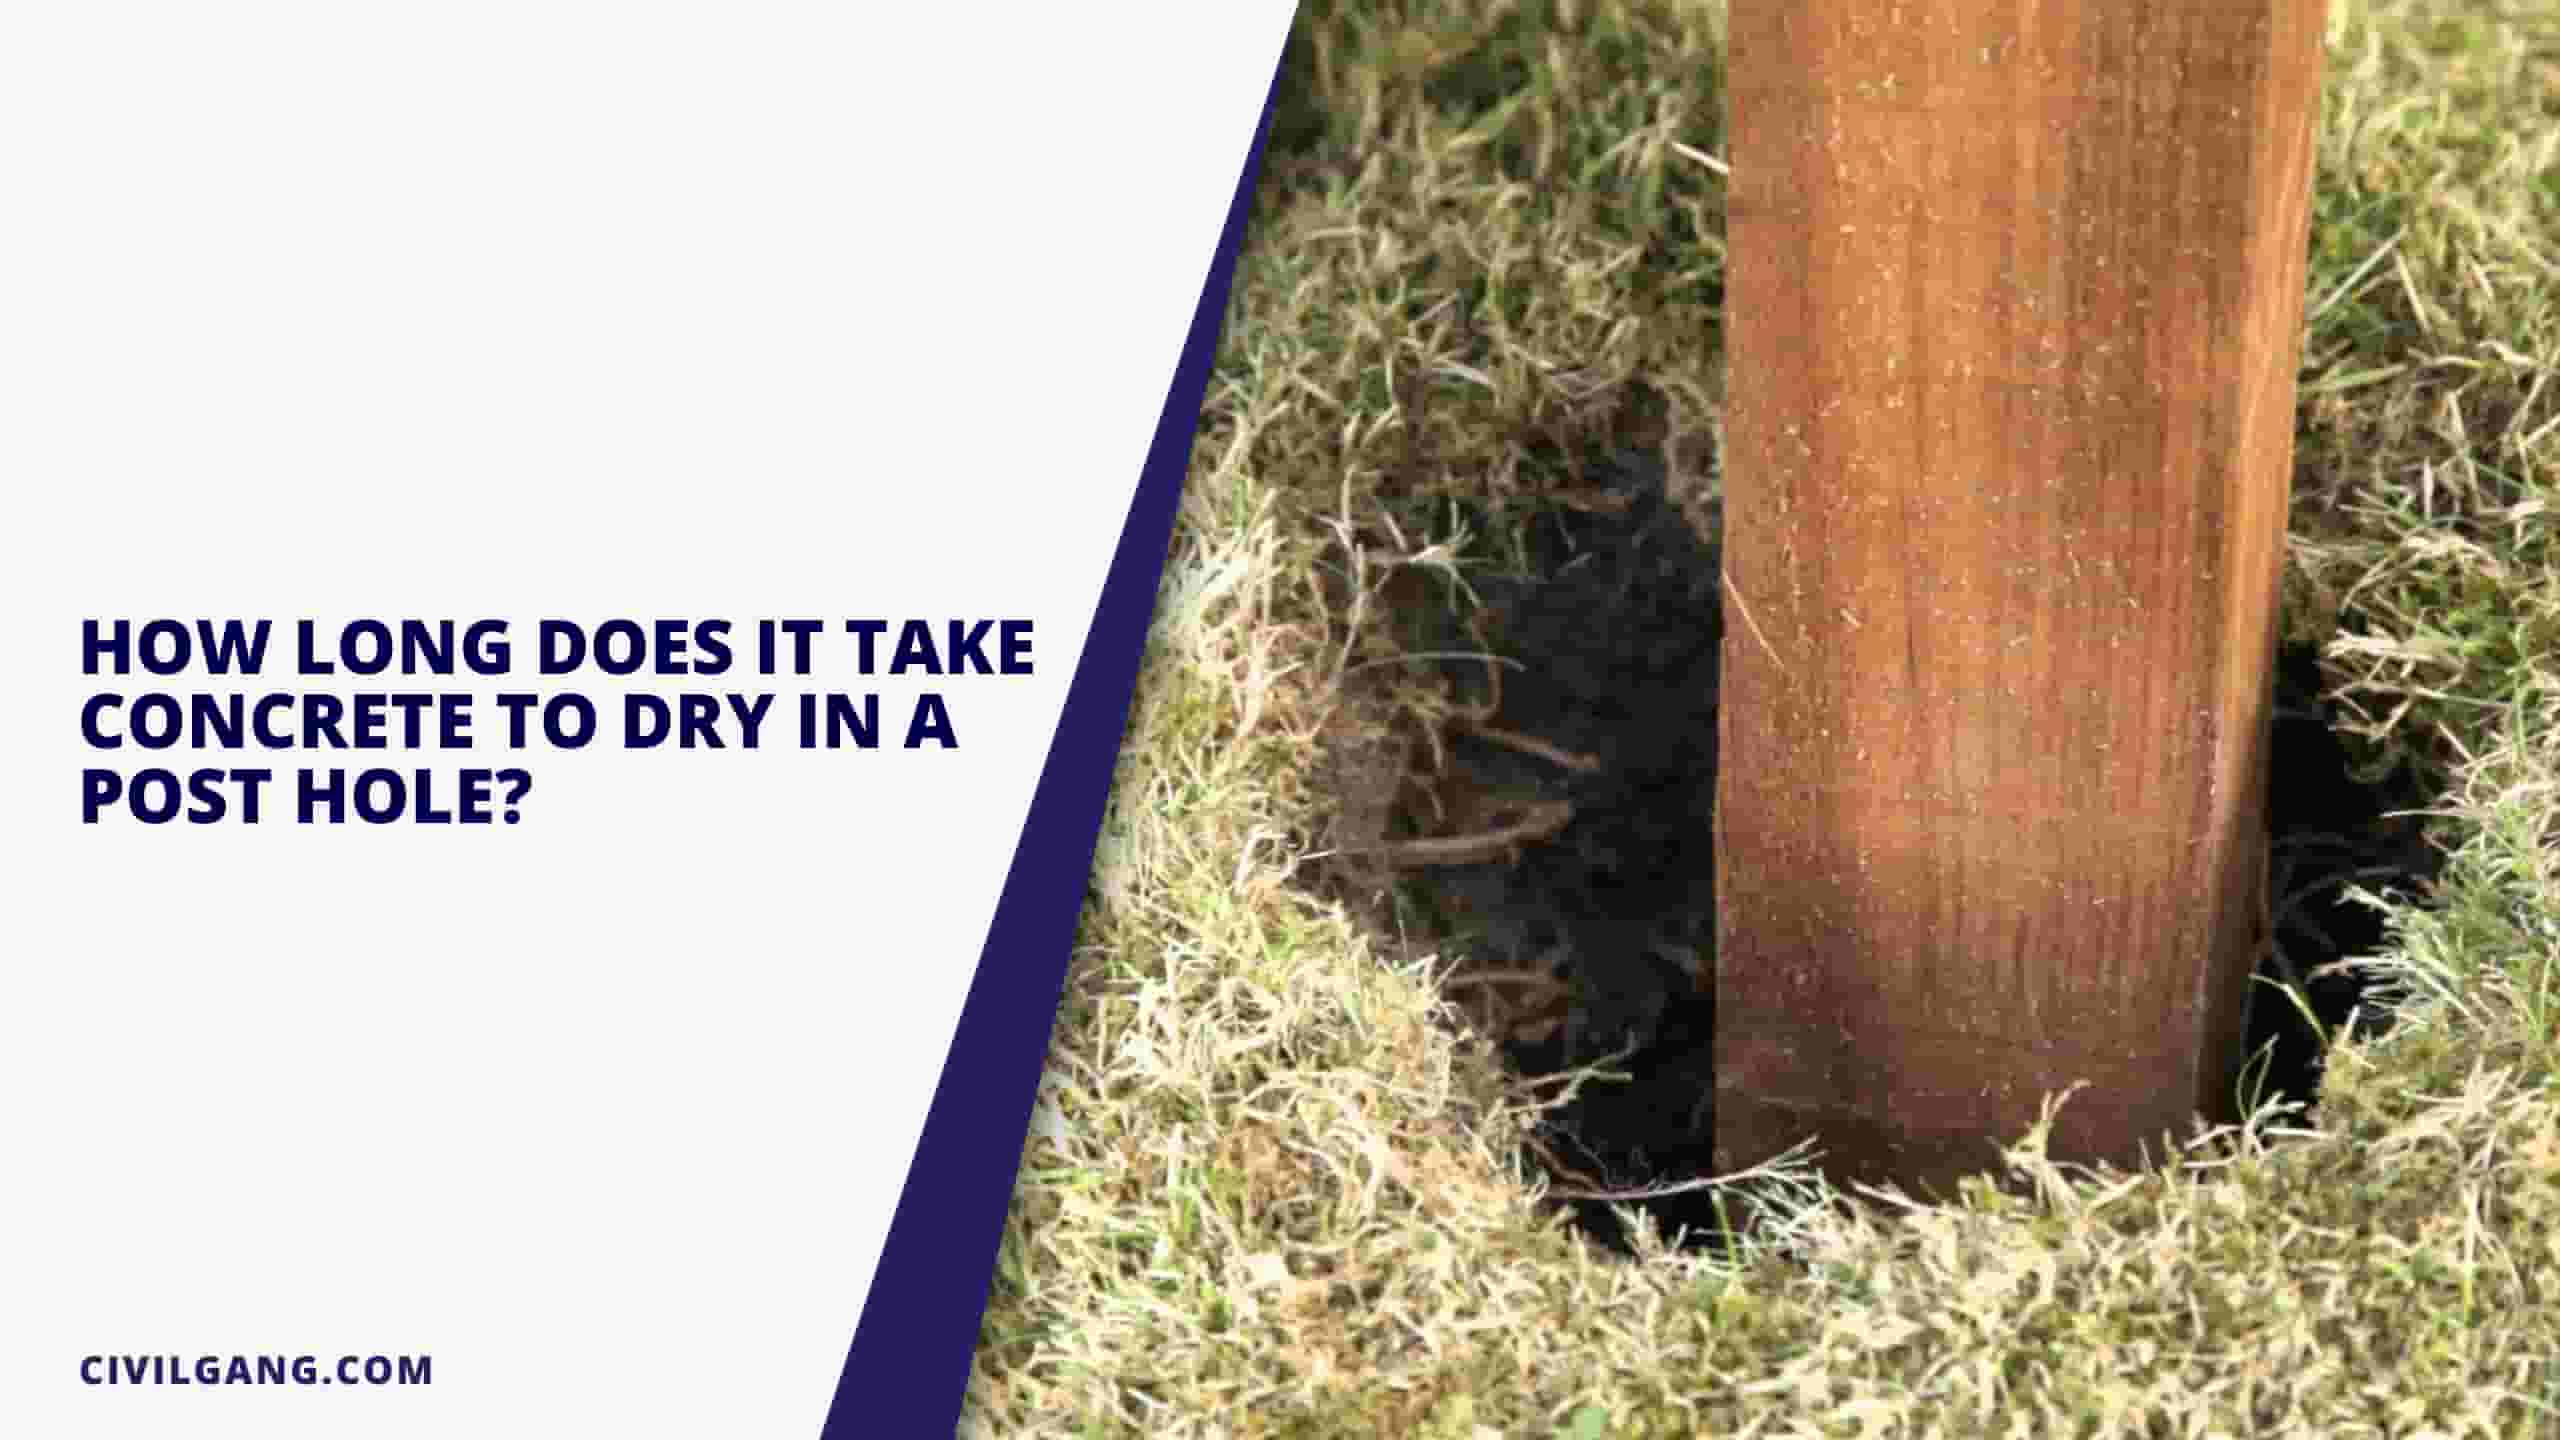 How Long Does It Take Concrete To Dry In A Post Hole?